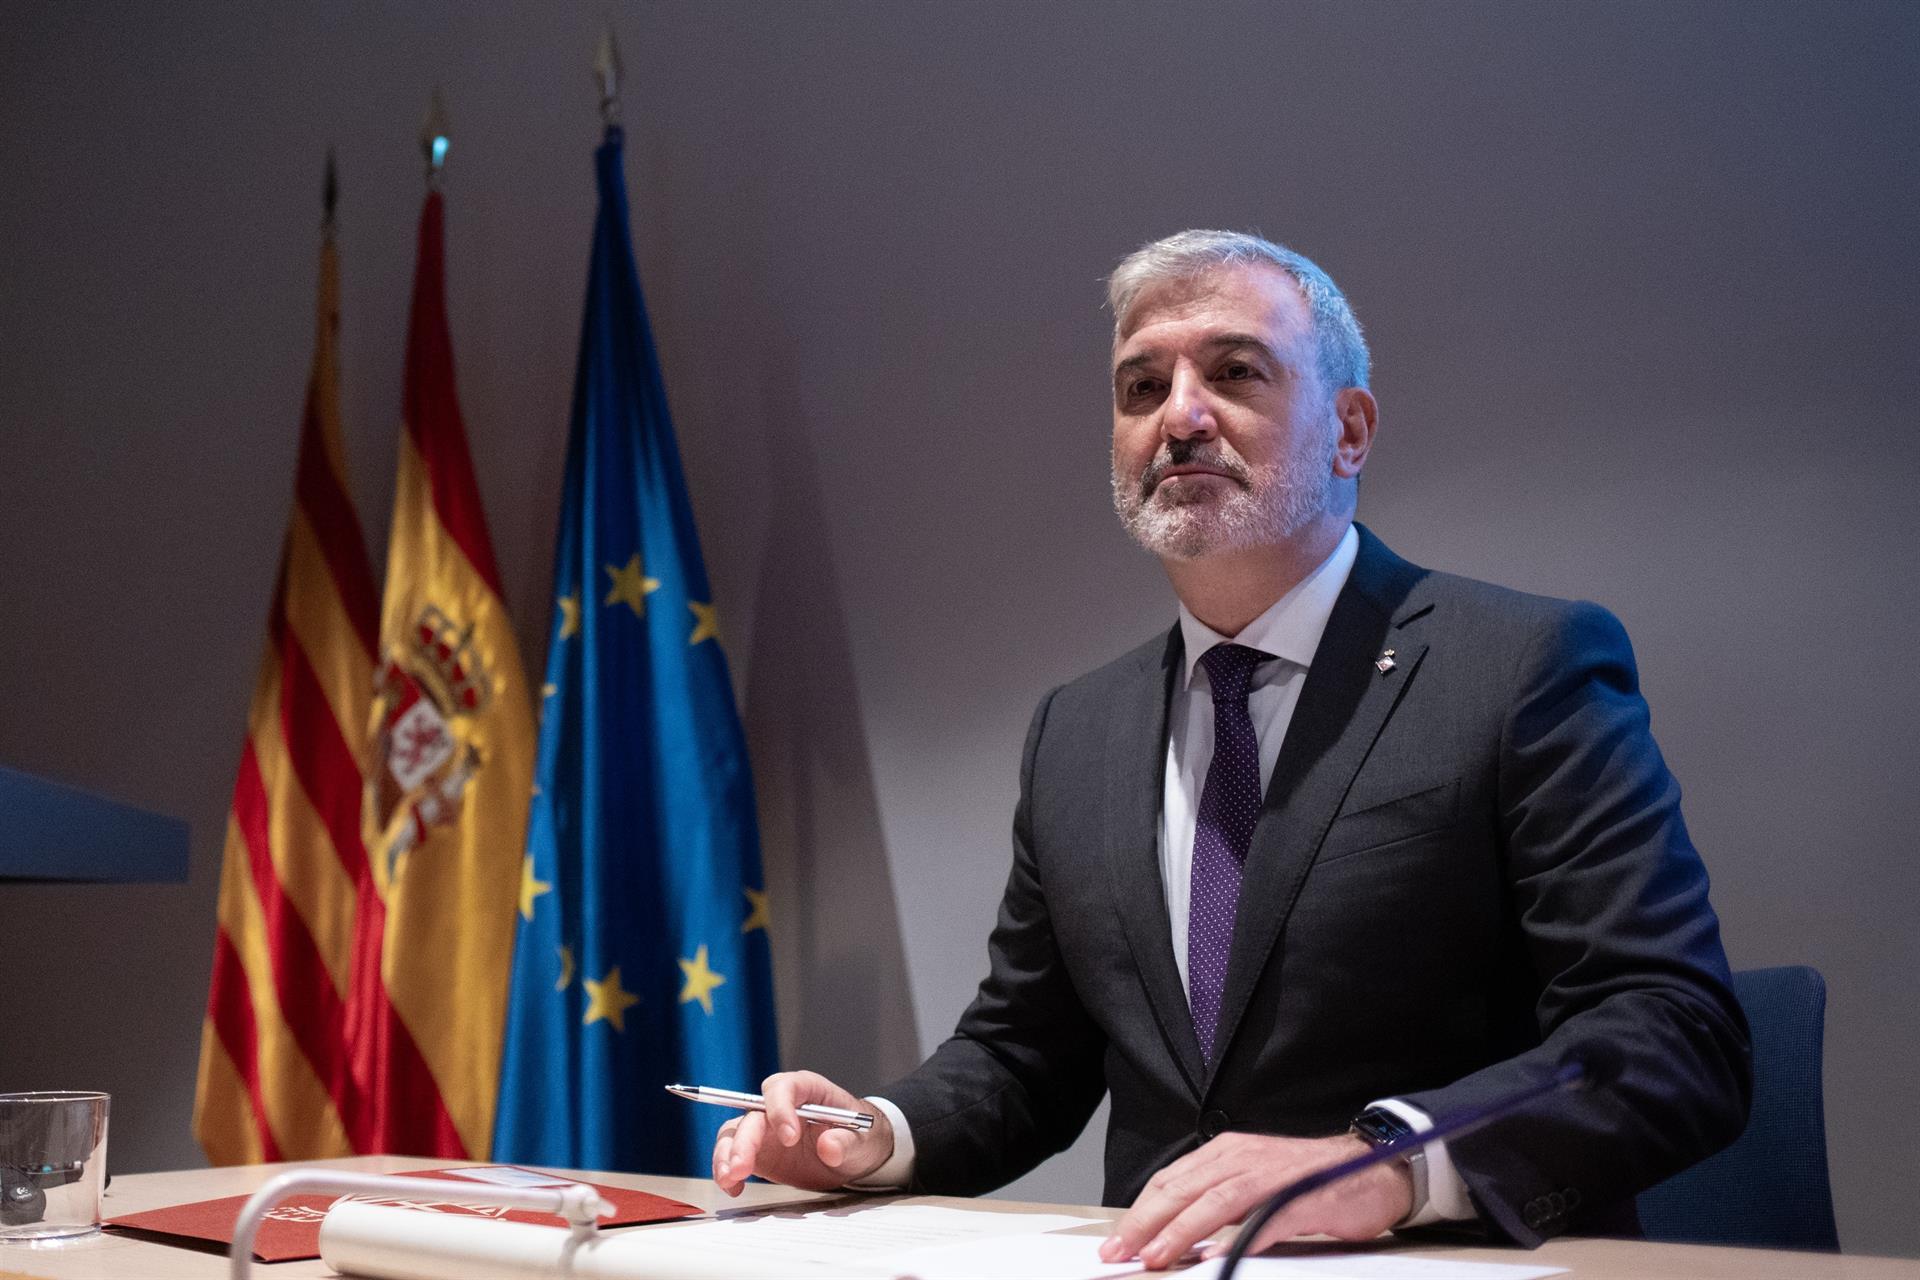 The mayor of Barcelona, ​​Jaume Collboni, at an event to commemorate the 45th anniversary of the Constitution